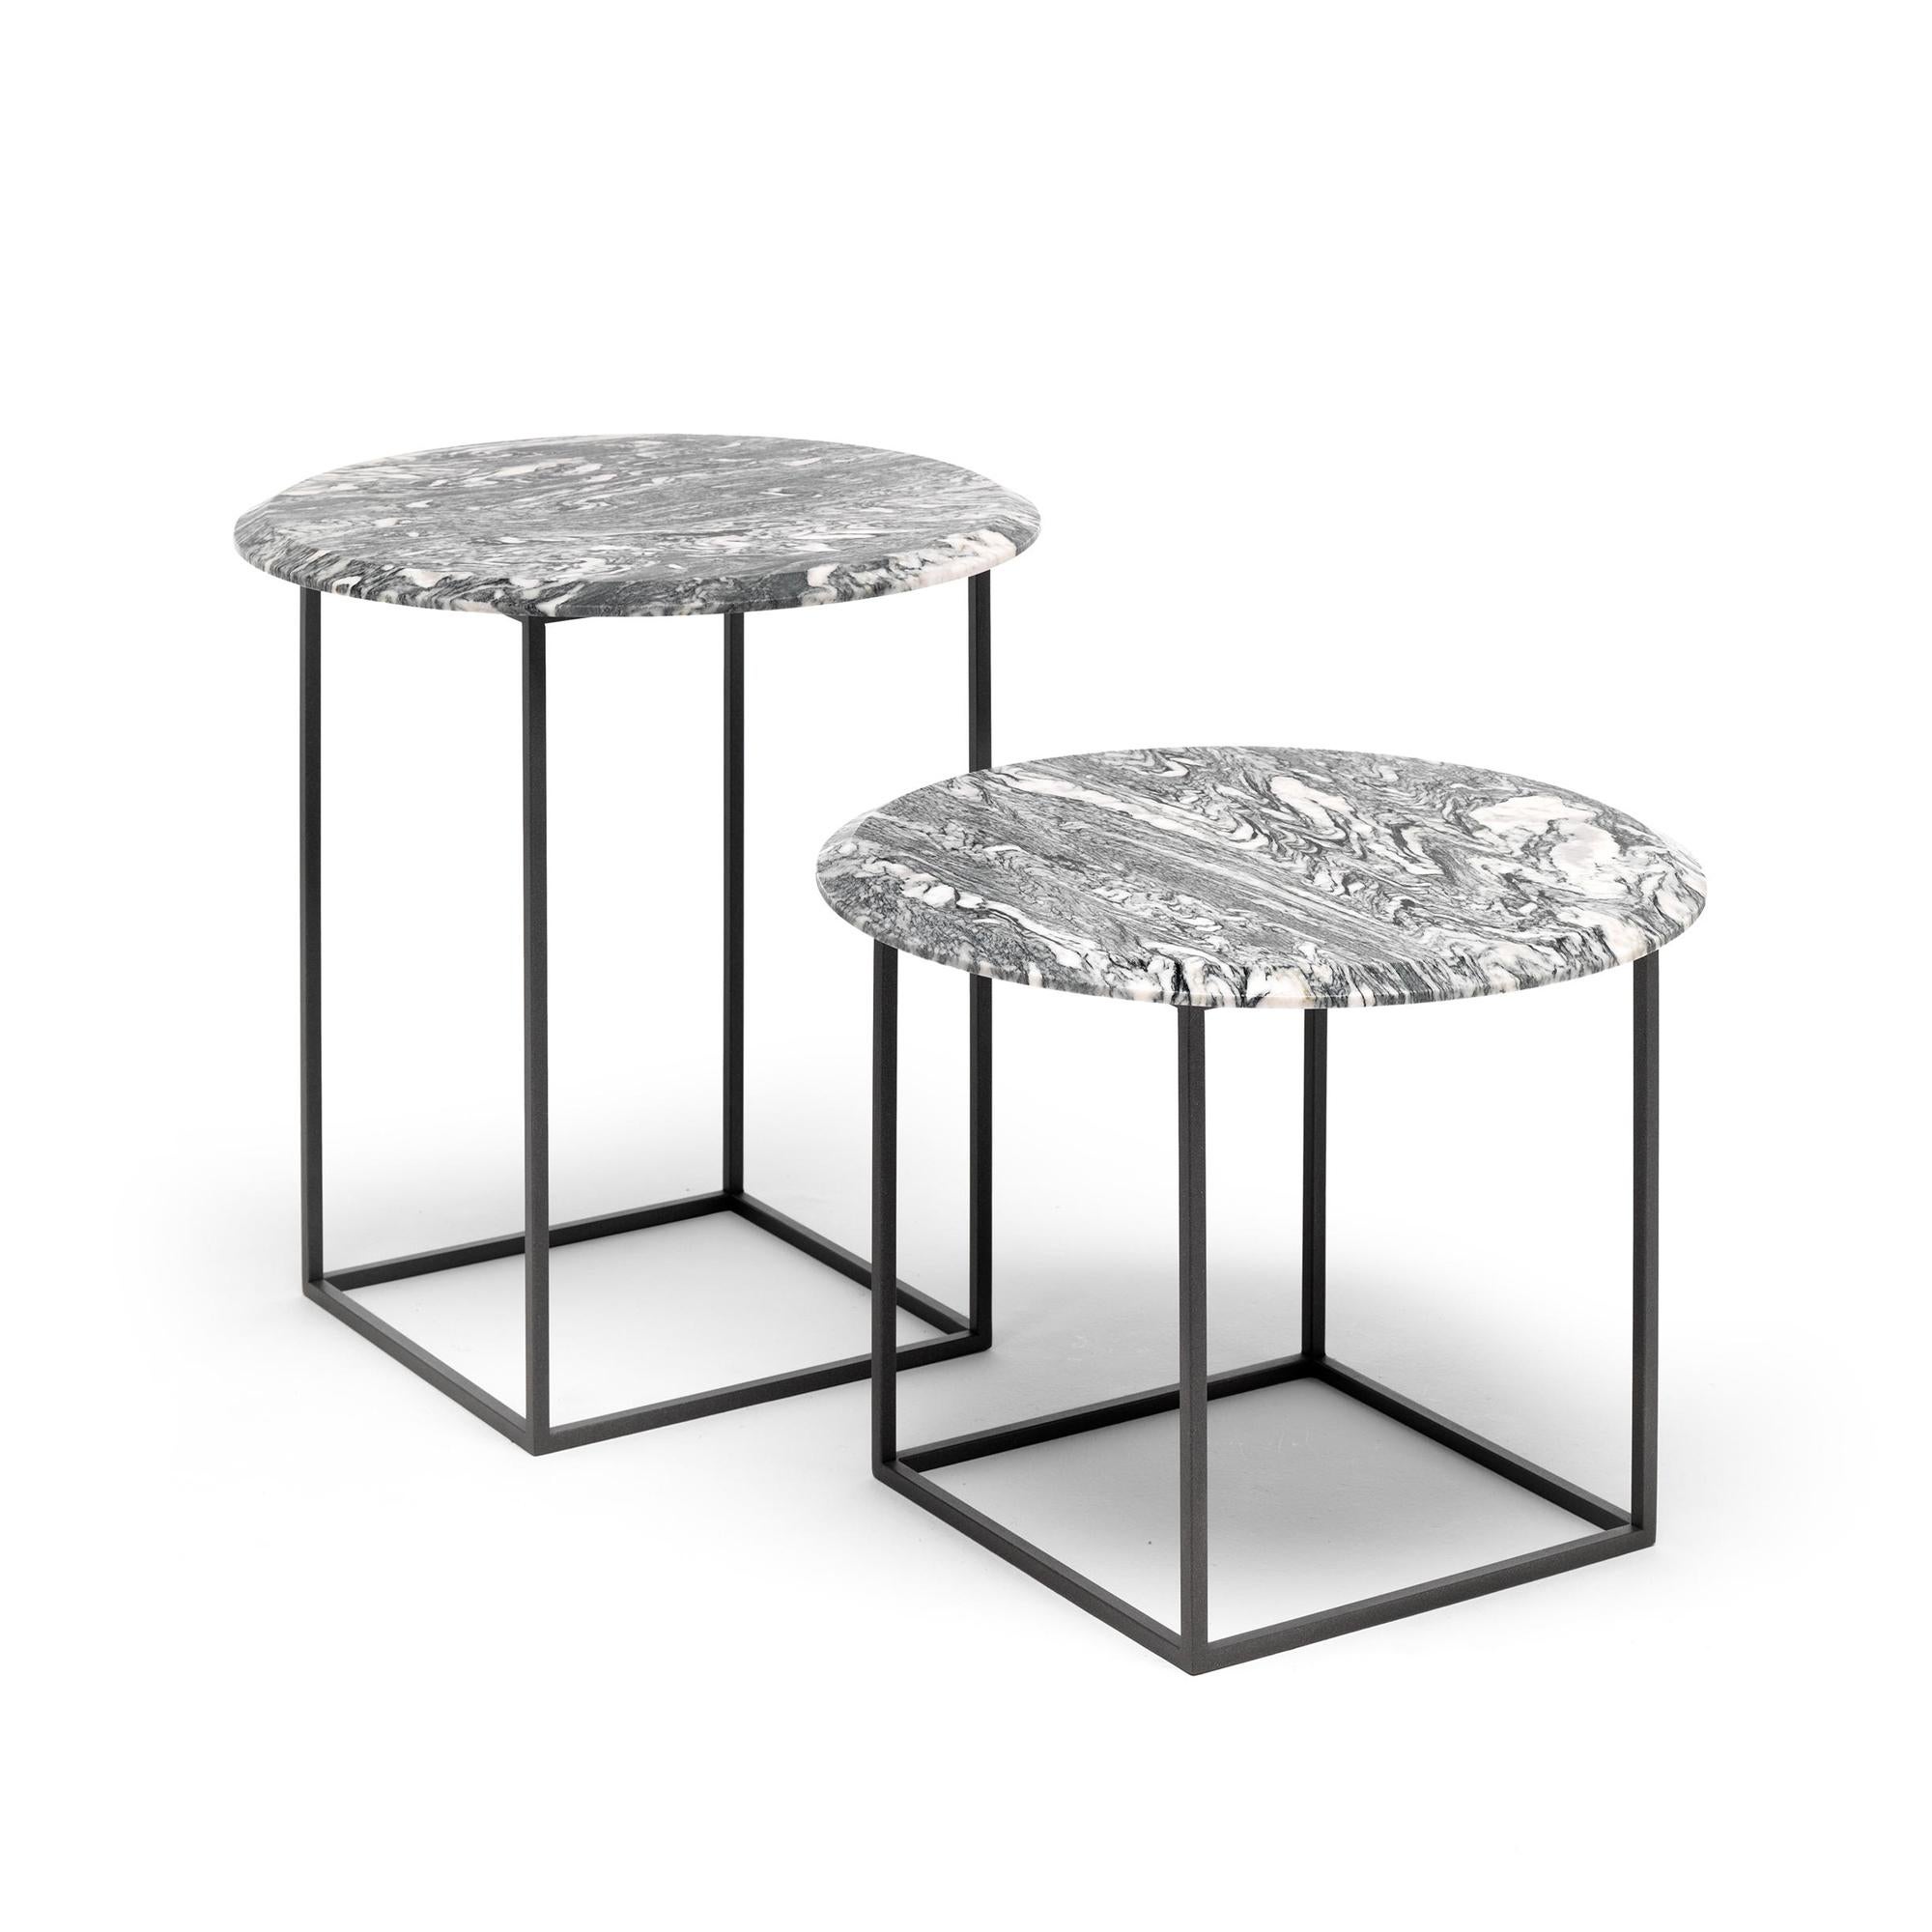 Italian 21st Century Modern Side Table With Painted Steel Base And Top In Solid Marble For Sale